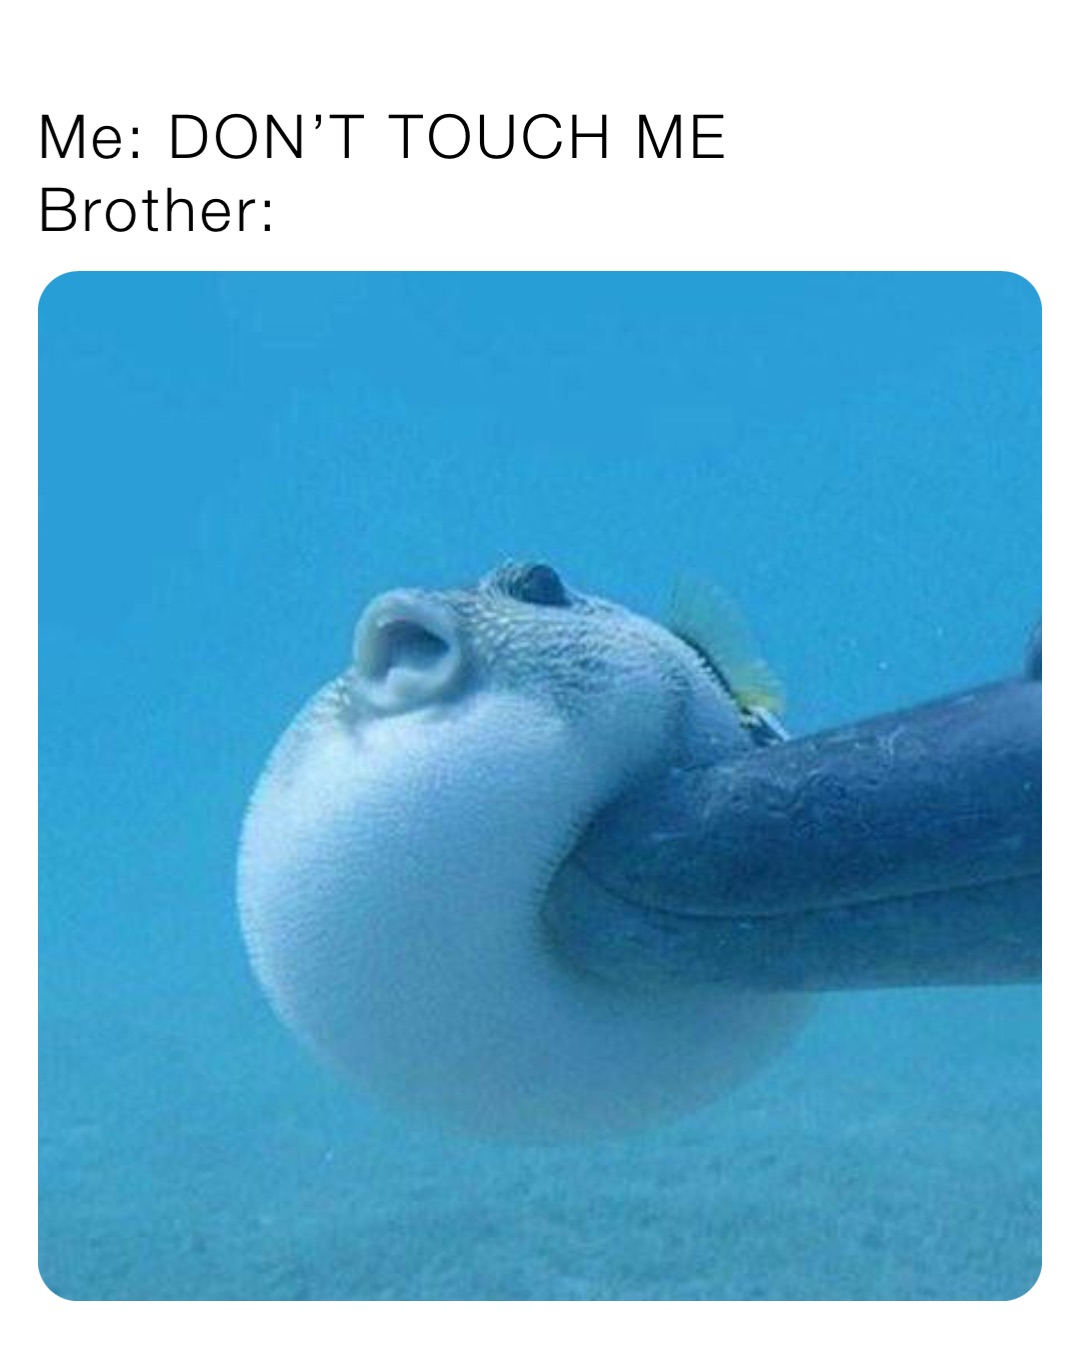 Me: DON’T TOUCH ME
Brother: